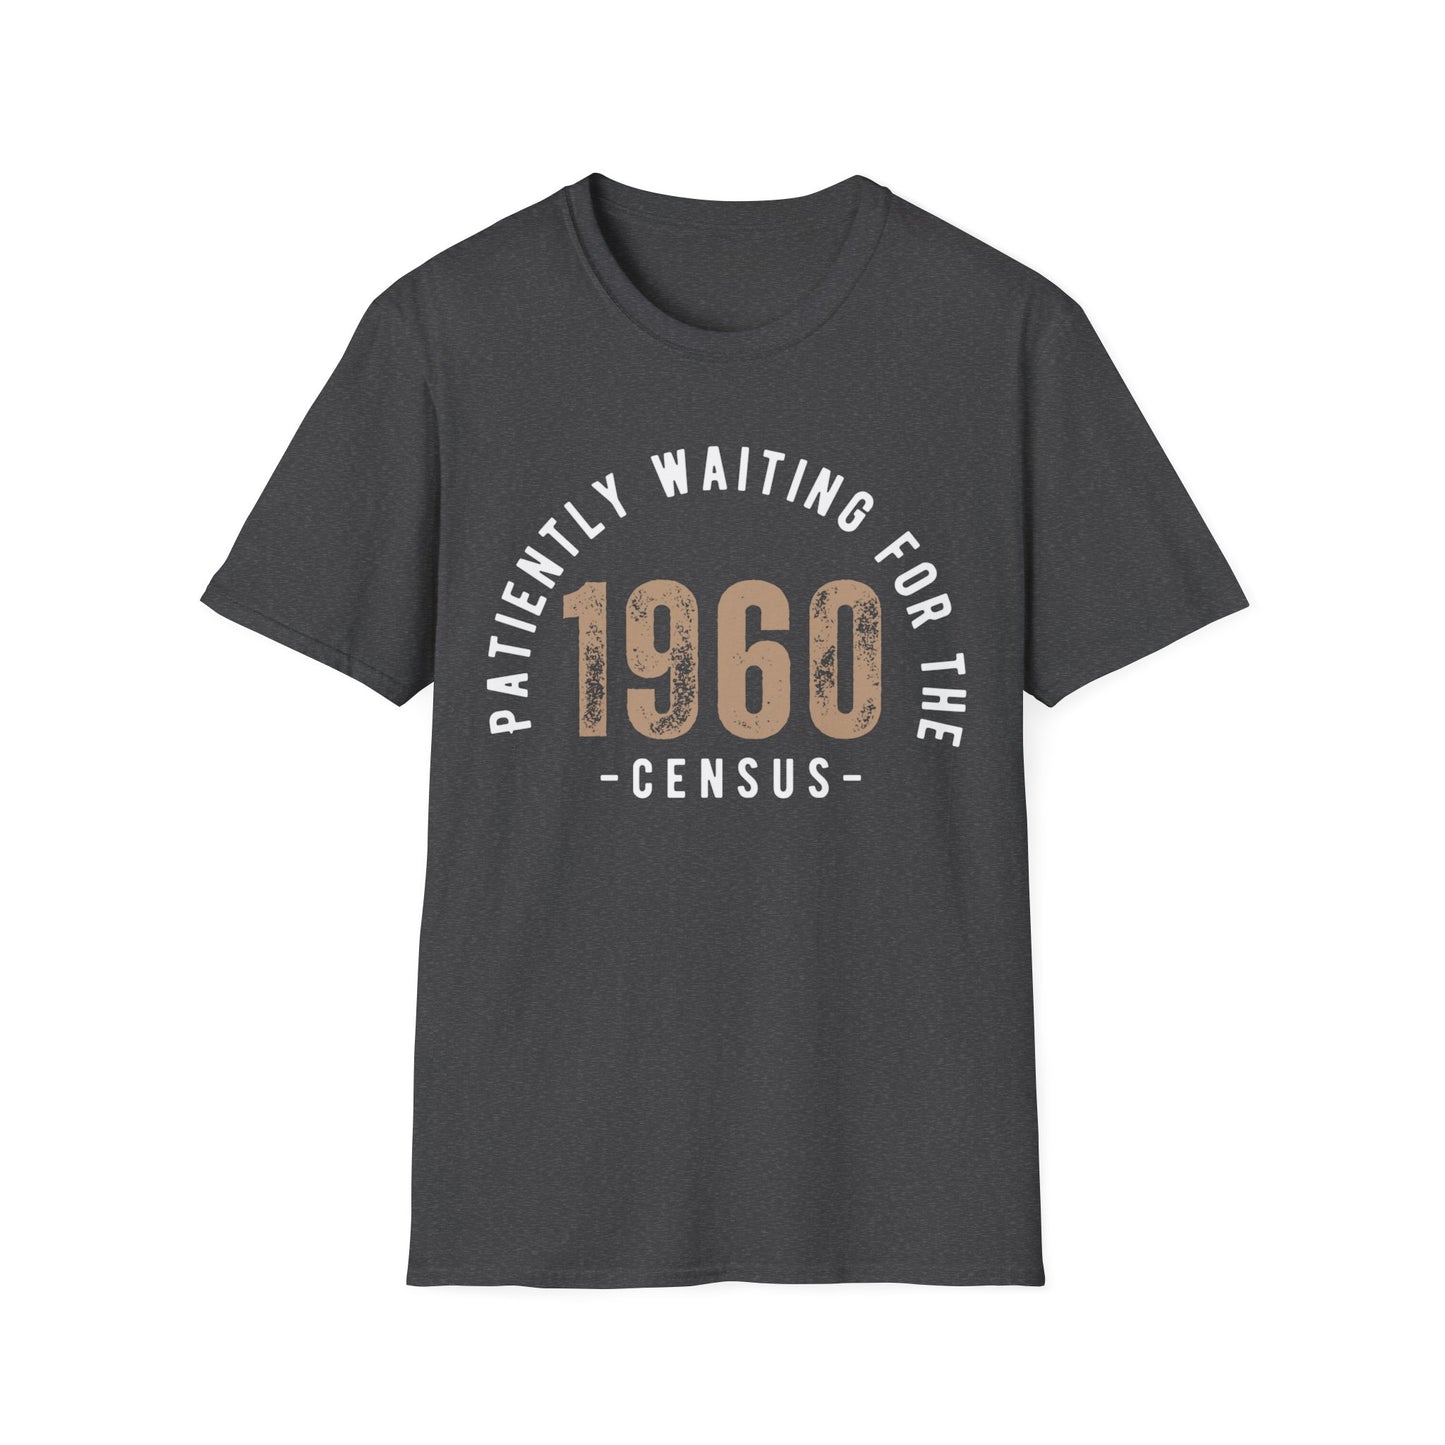 Patiently Waiting for The 1960 Census T-Shirt